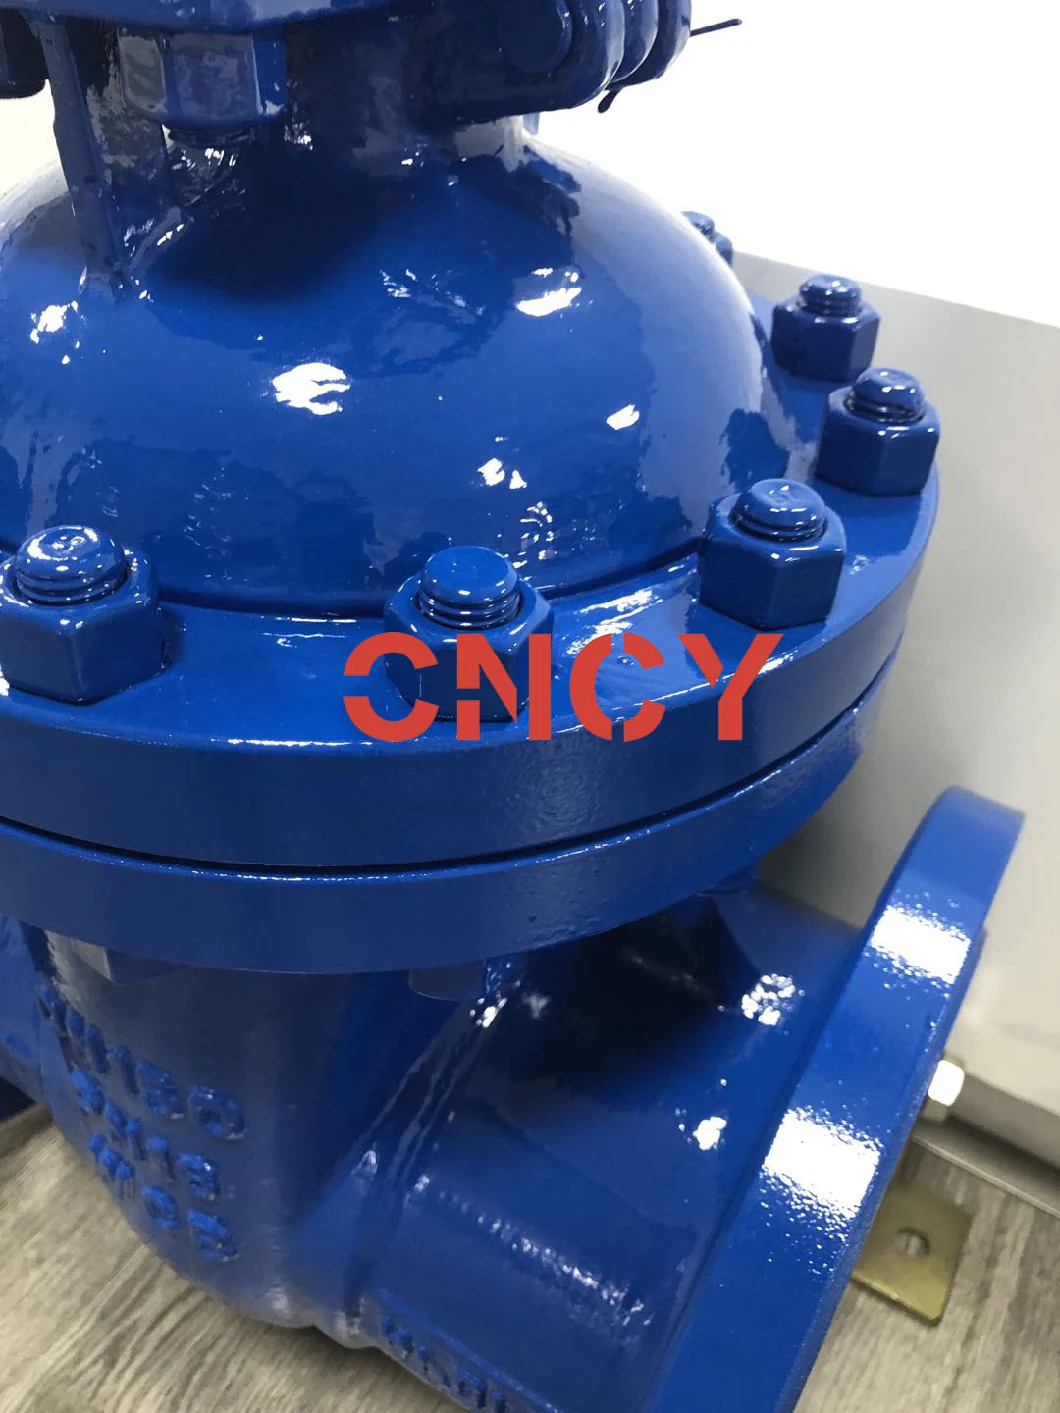 DIN Carbon Steel Wcb Gear Operation with ISO Plate Wedge out Side Gate Valve Manufacturer